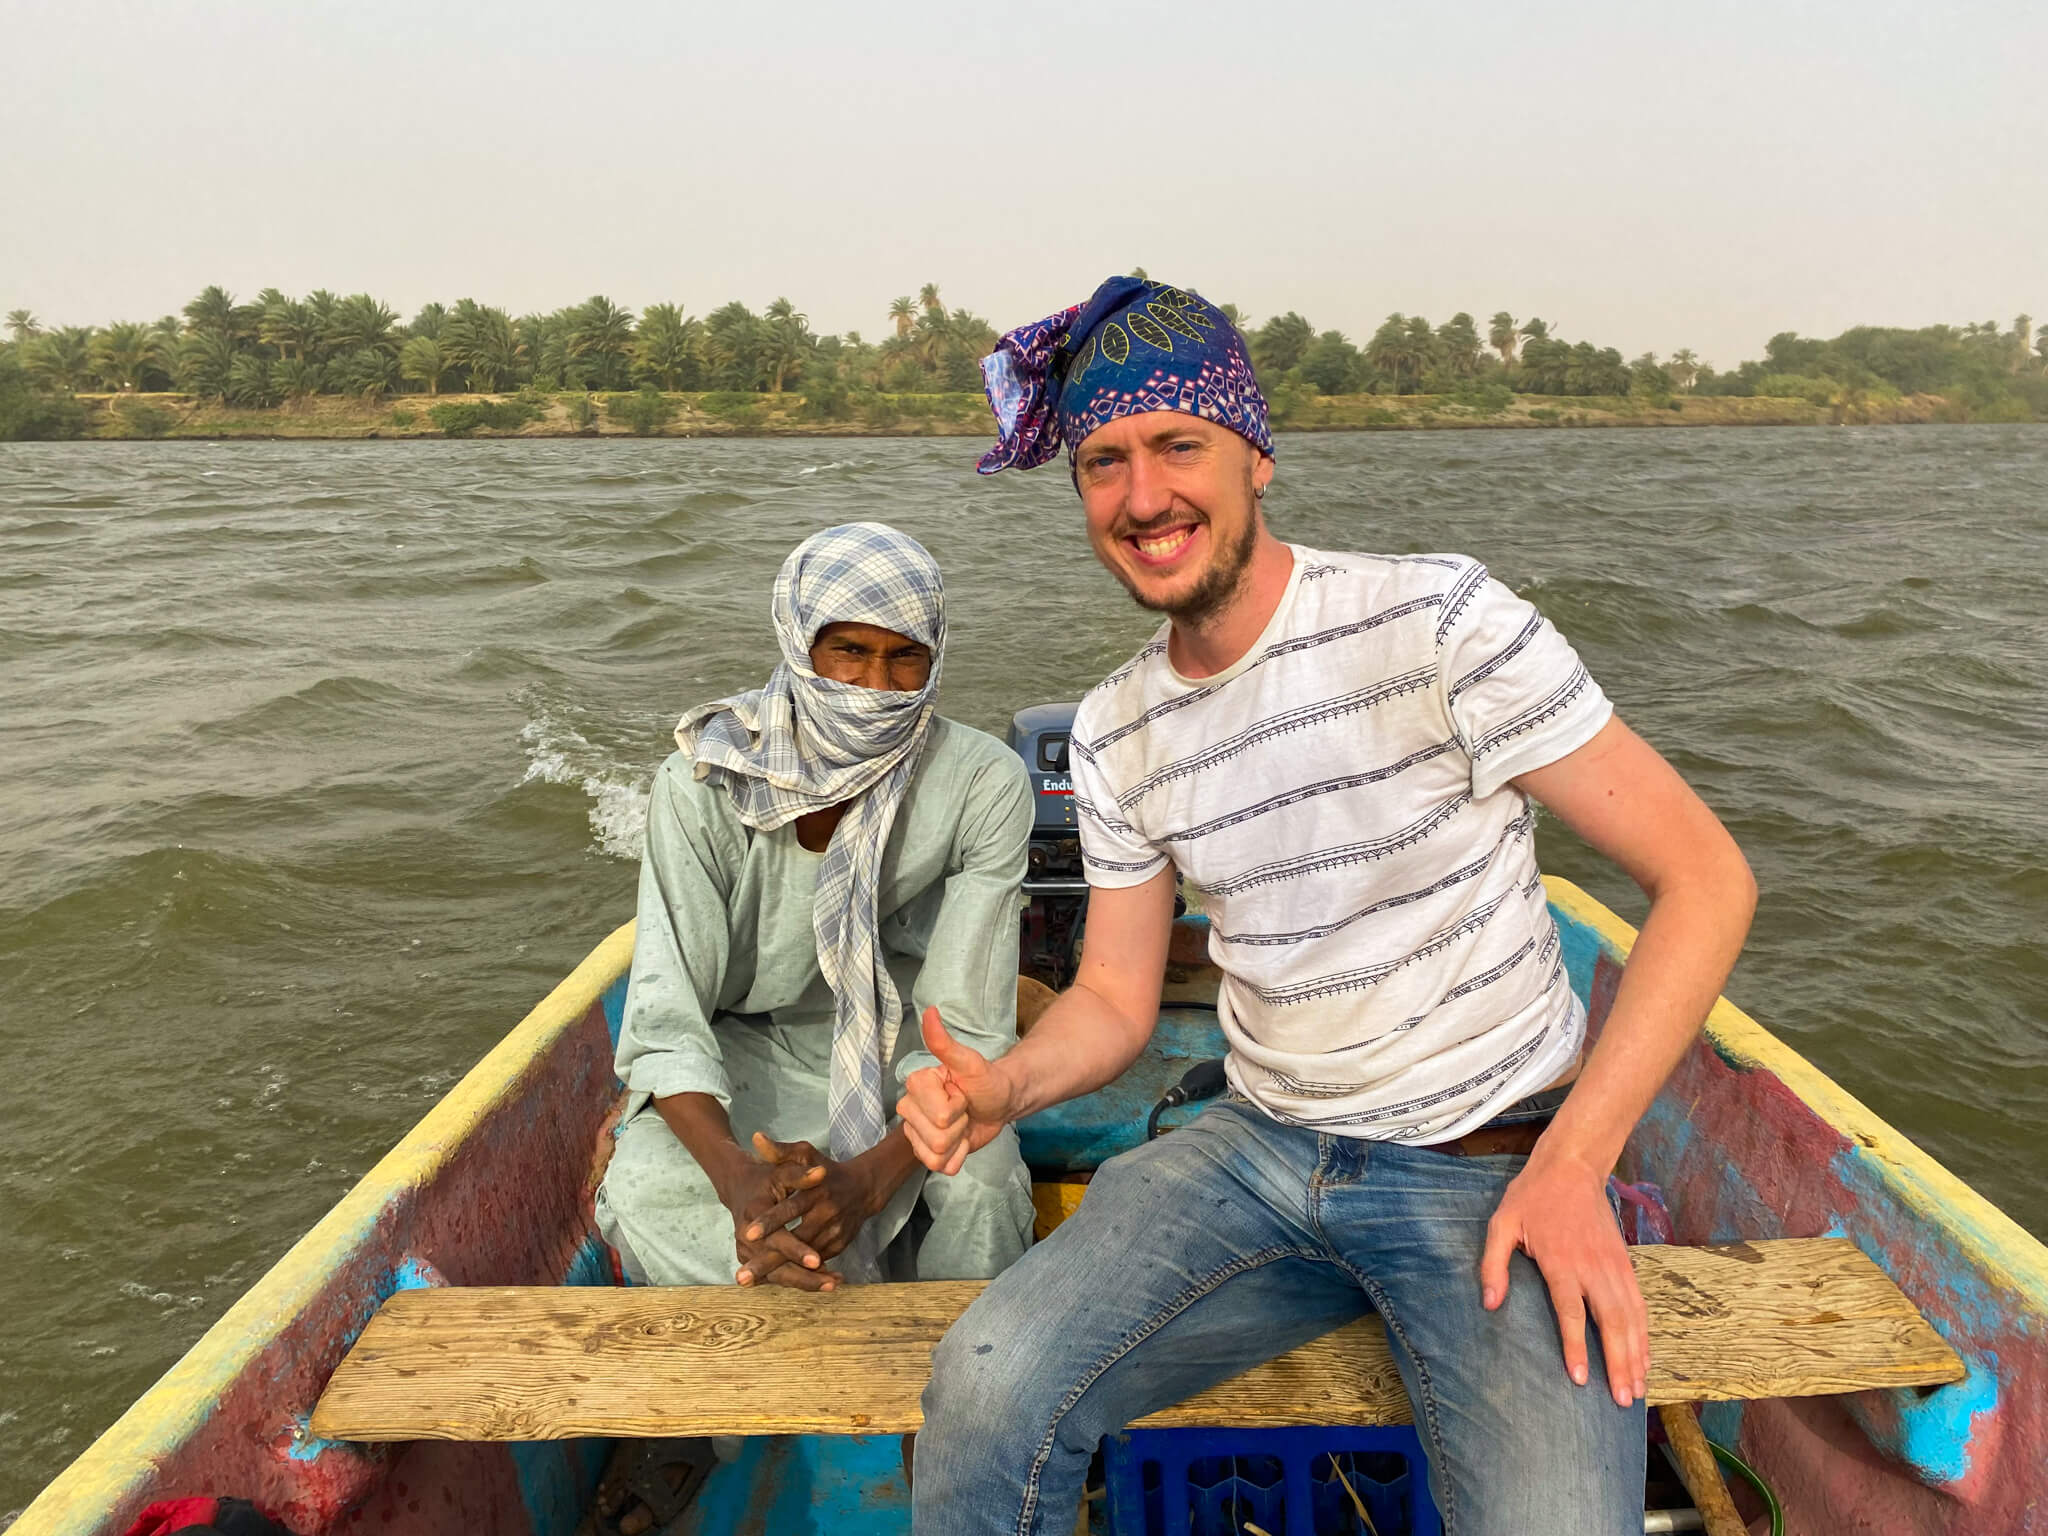 Me in a small motorboat crossing the Nile.  My boatman sits in the back wearing traditional Nubian clothes.